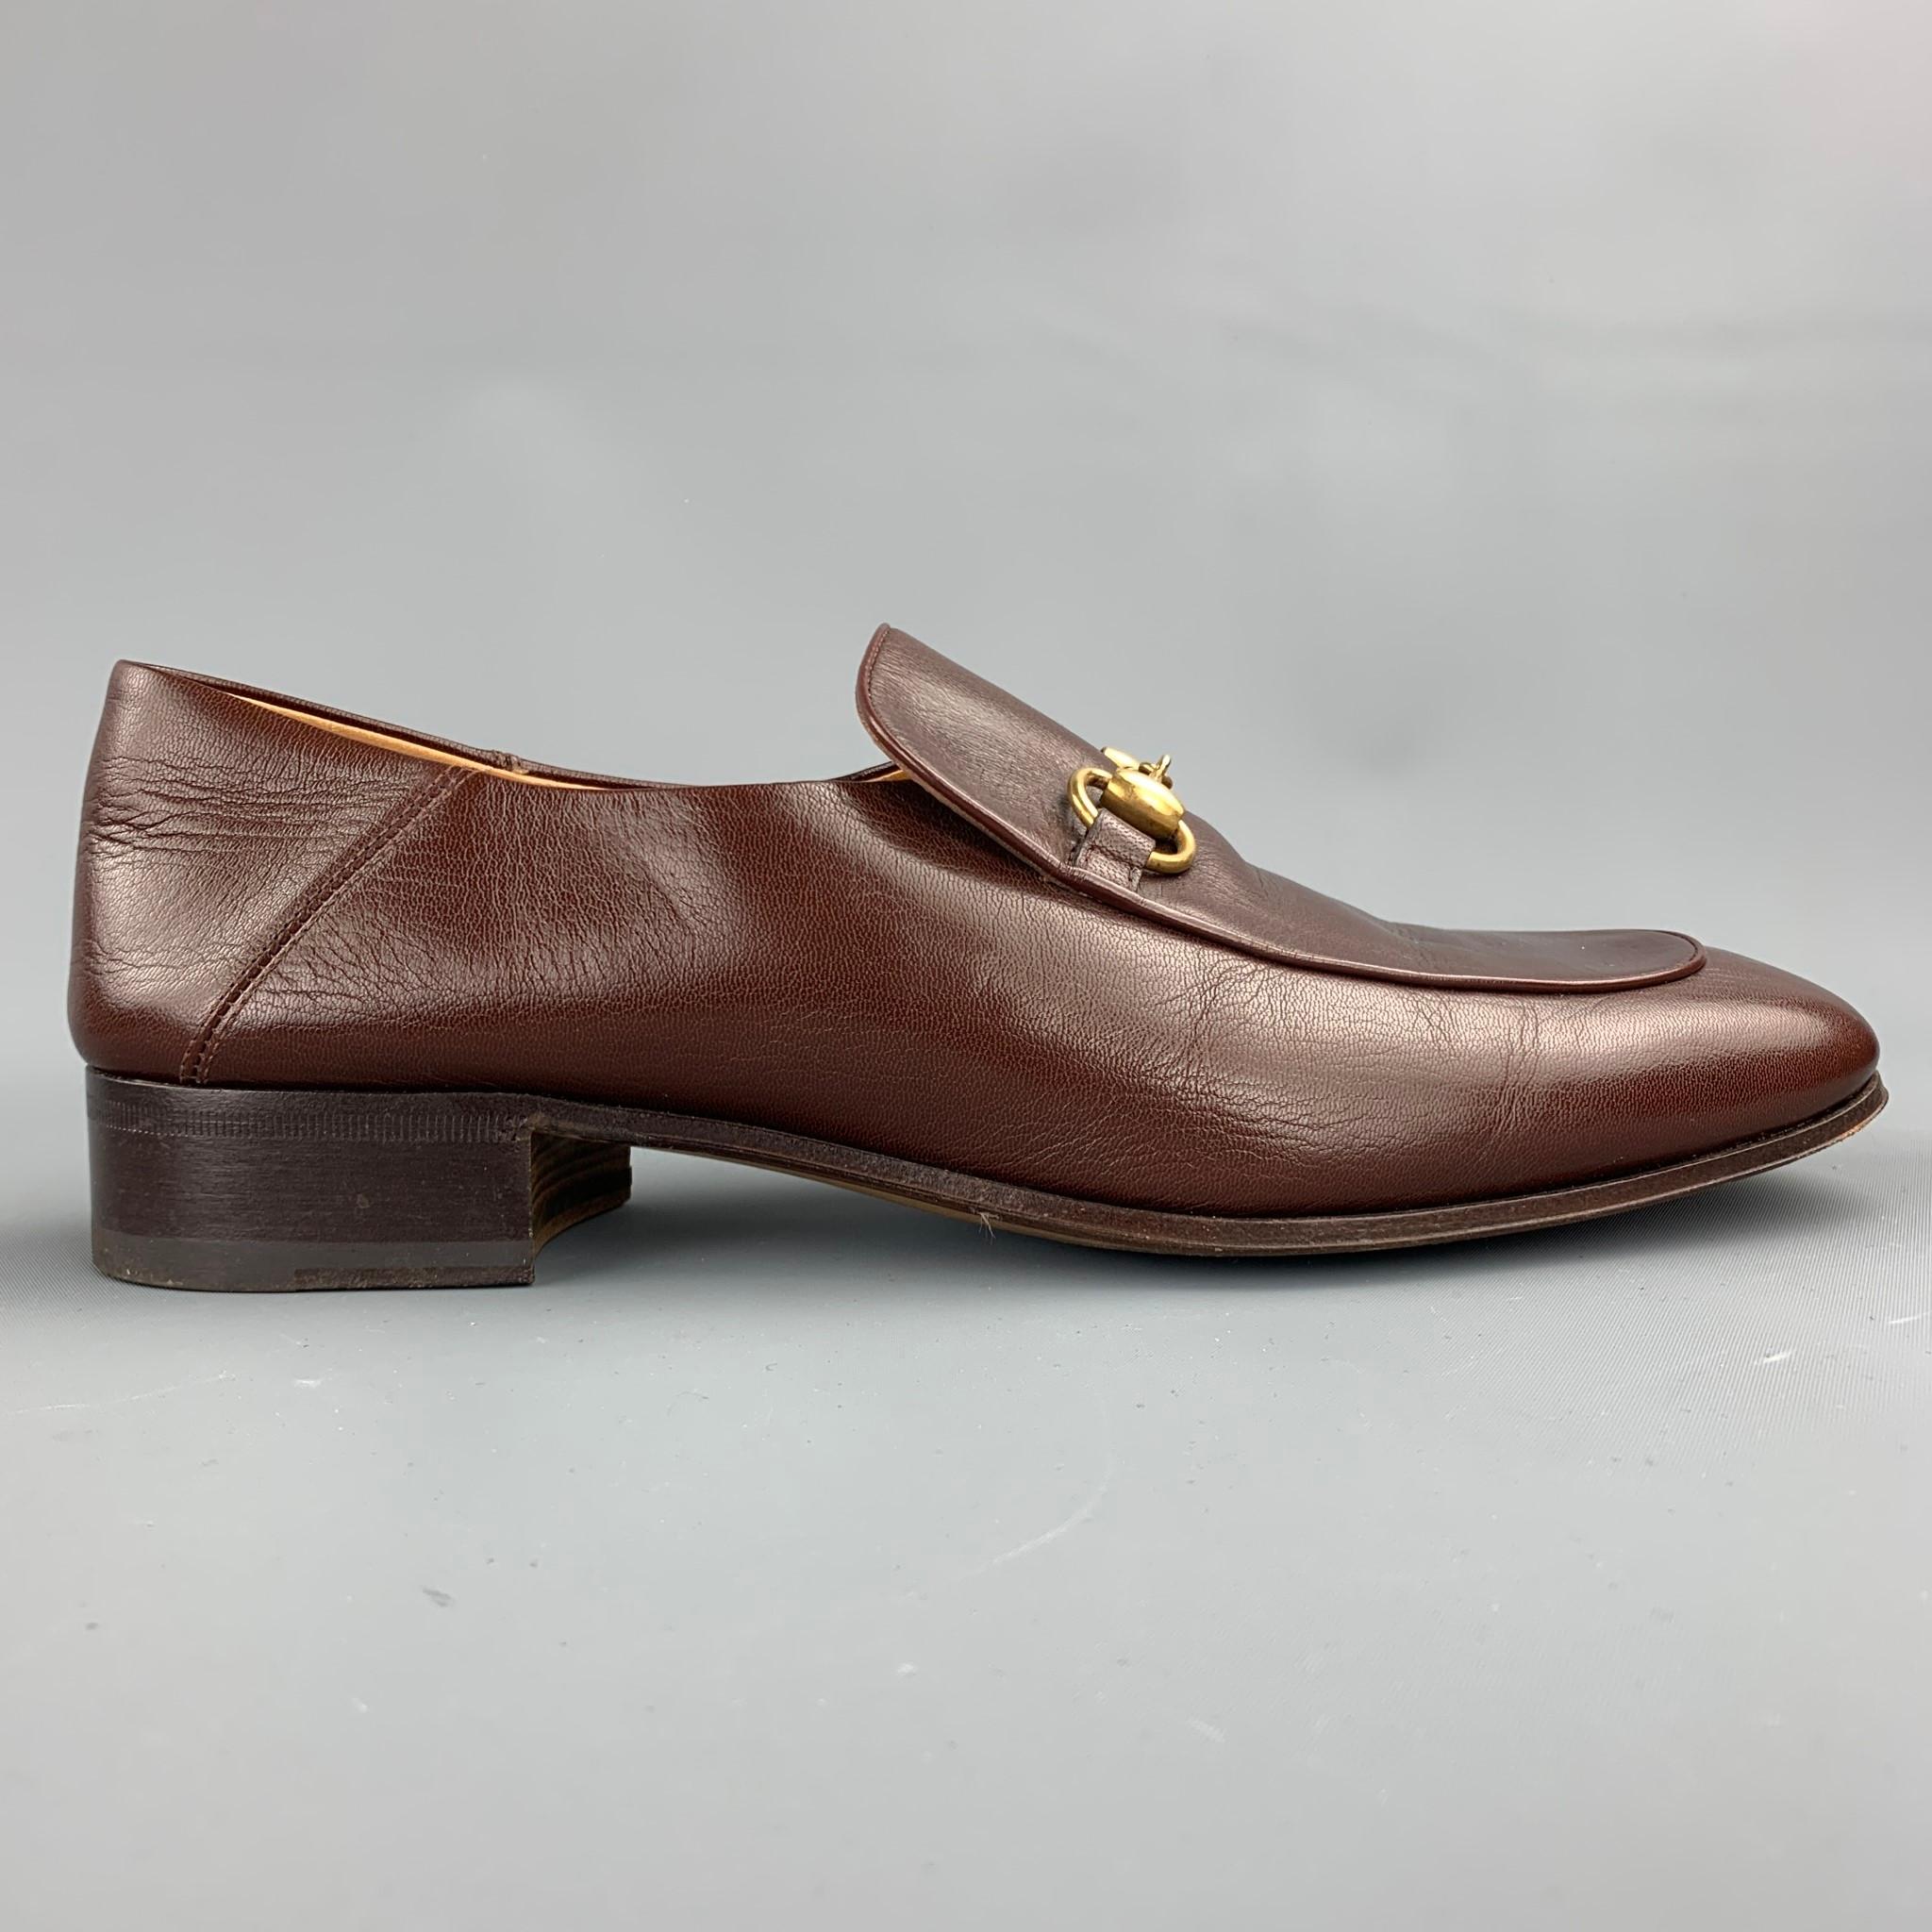 GUCCI loafers comes in a brown leather featuring a slip on style, front gold tone horsebit detail, and a wooden sole. Minor wear. Made in Italy.

Good Pre-Owned Condition.
Marked: 526297 10 13B

Outsole:

11.5 in. x 3.5 in. 